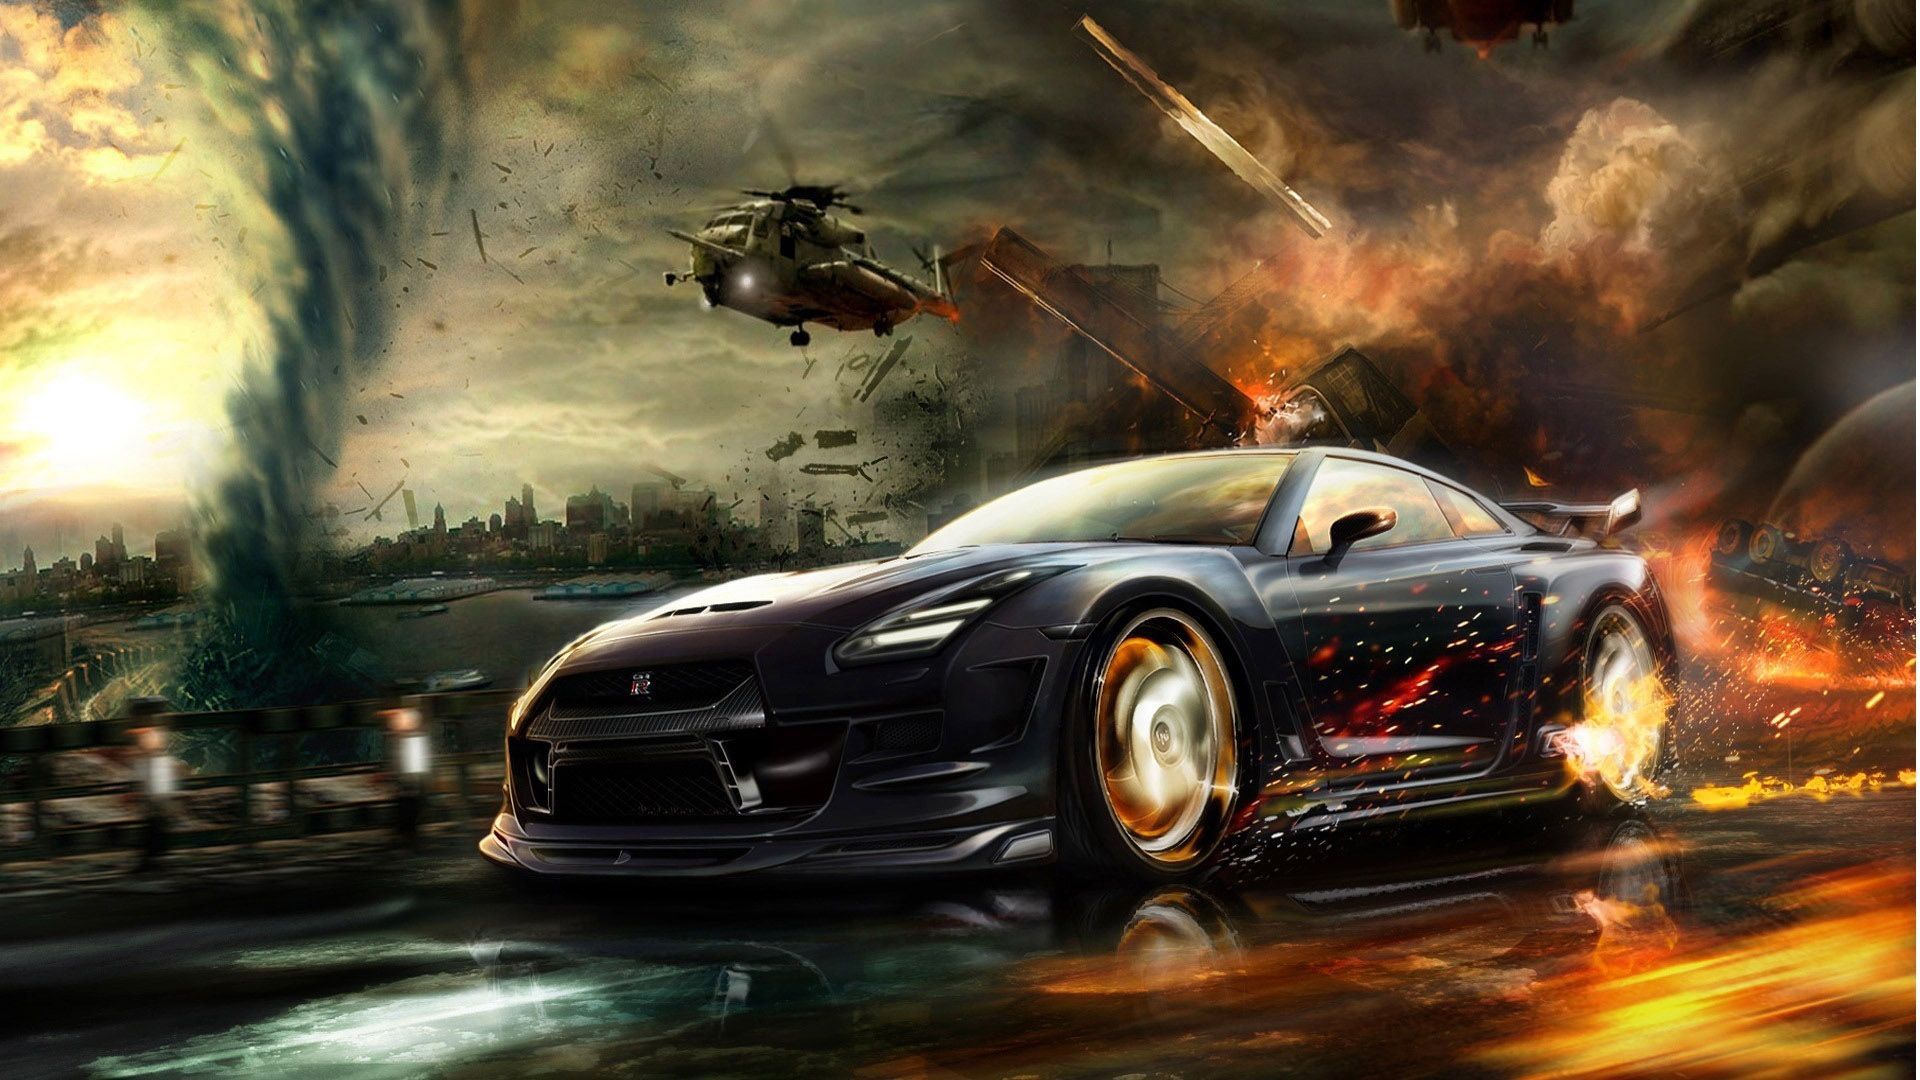 Animated Cars Wallpapers Animated Car Wallpaper Tuned Car - Cars ...